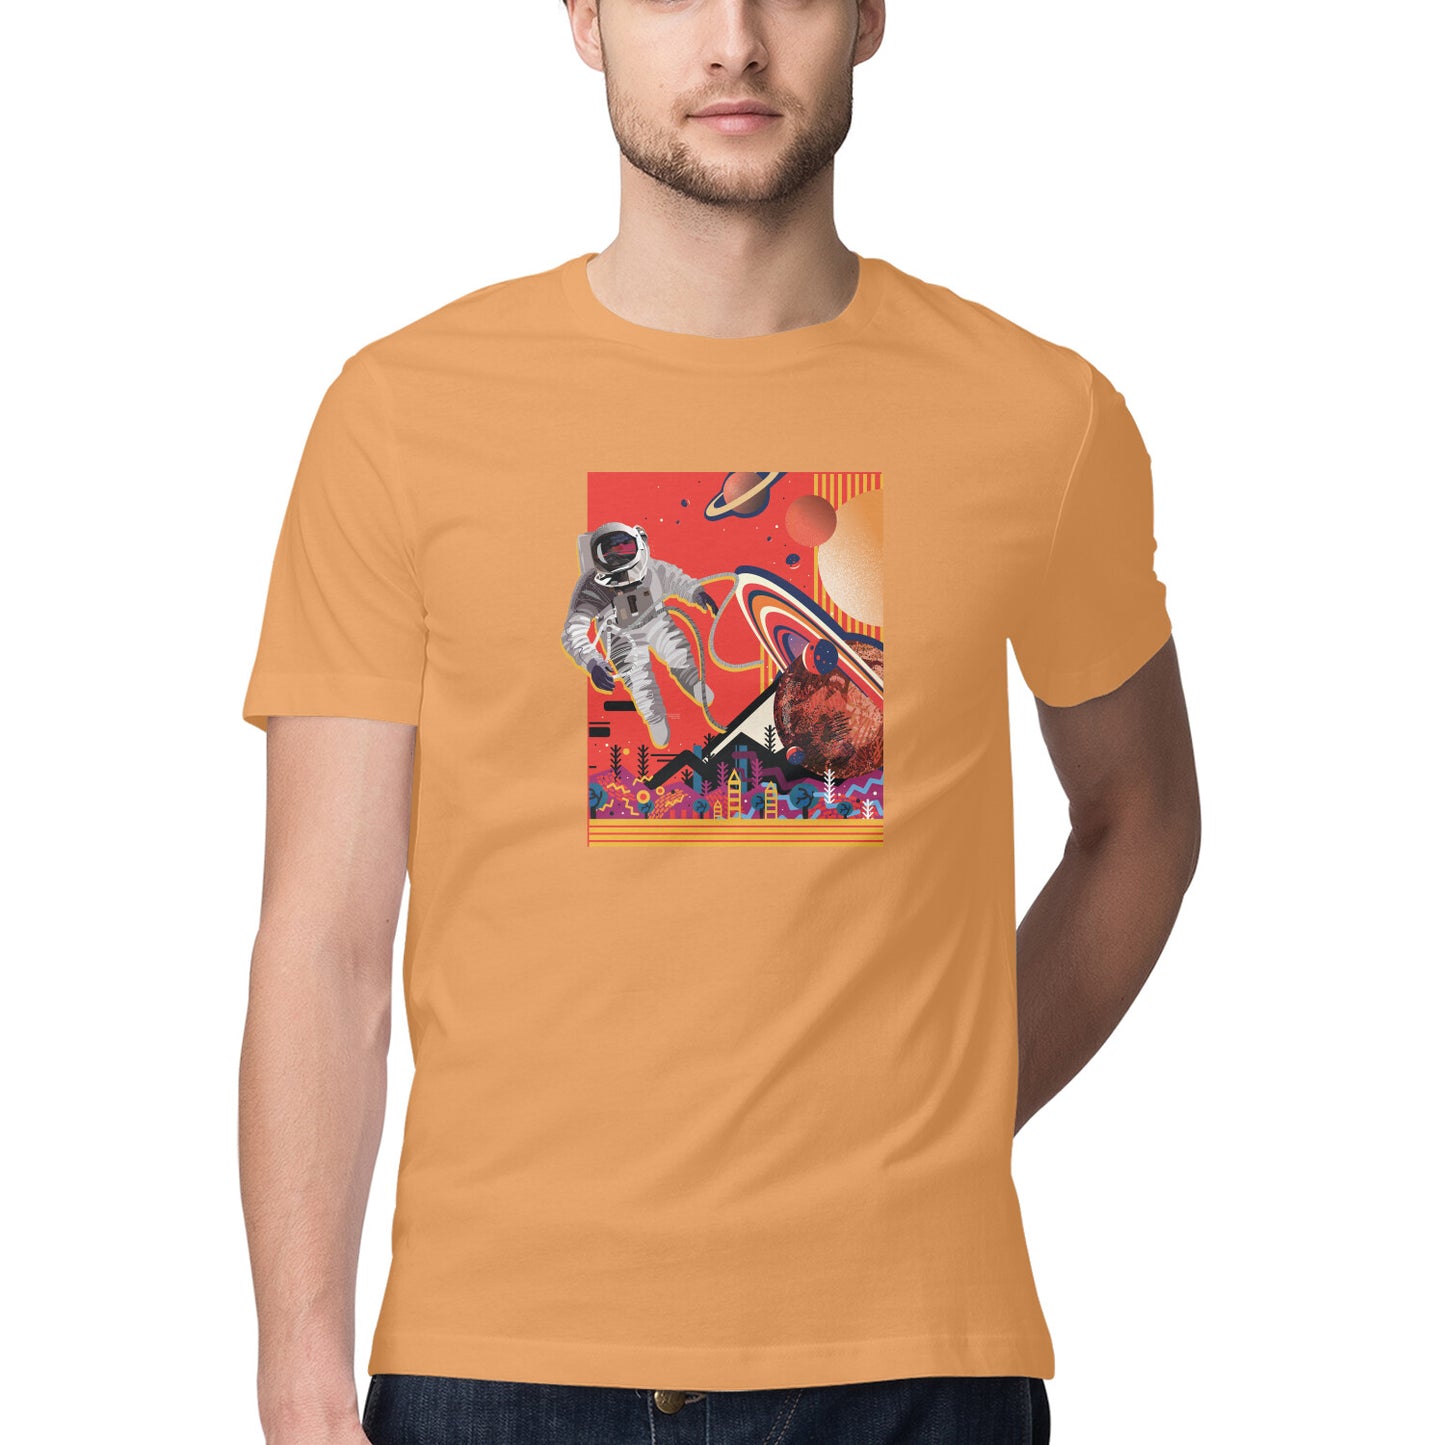 Space Art 09 Printed Graphic T-Shirt